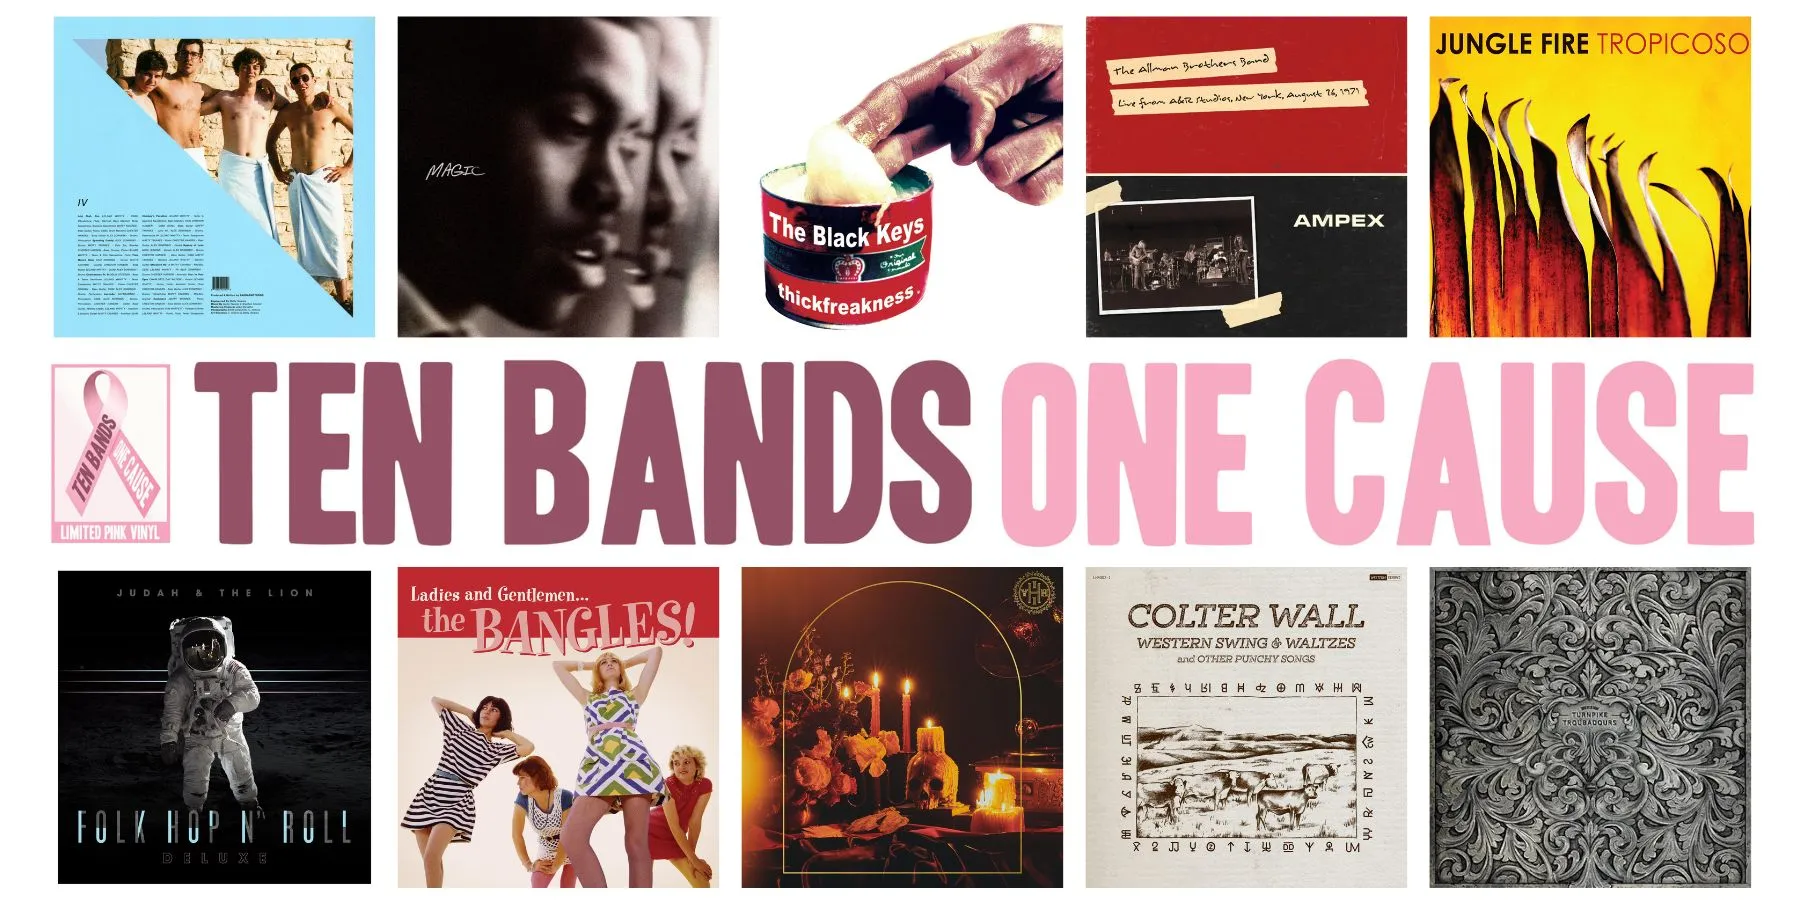 10 Bands One Cause